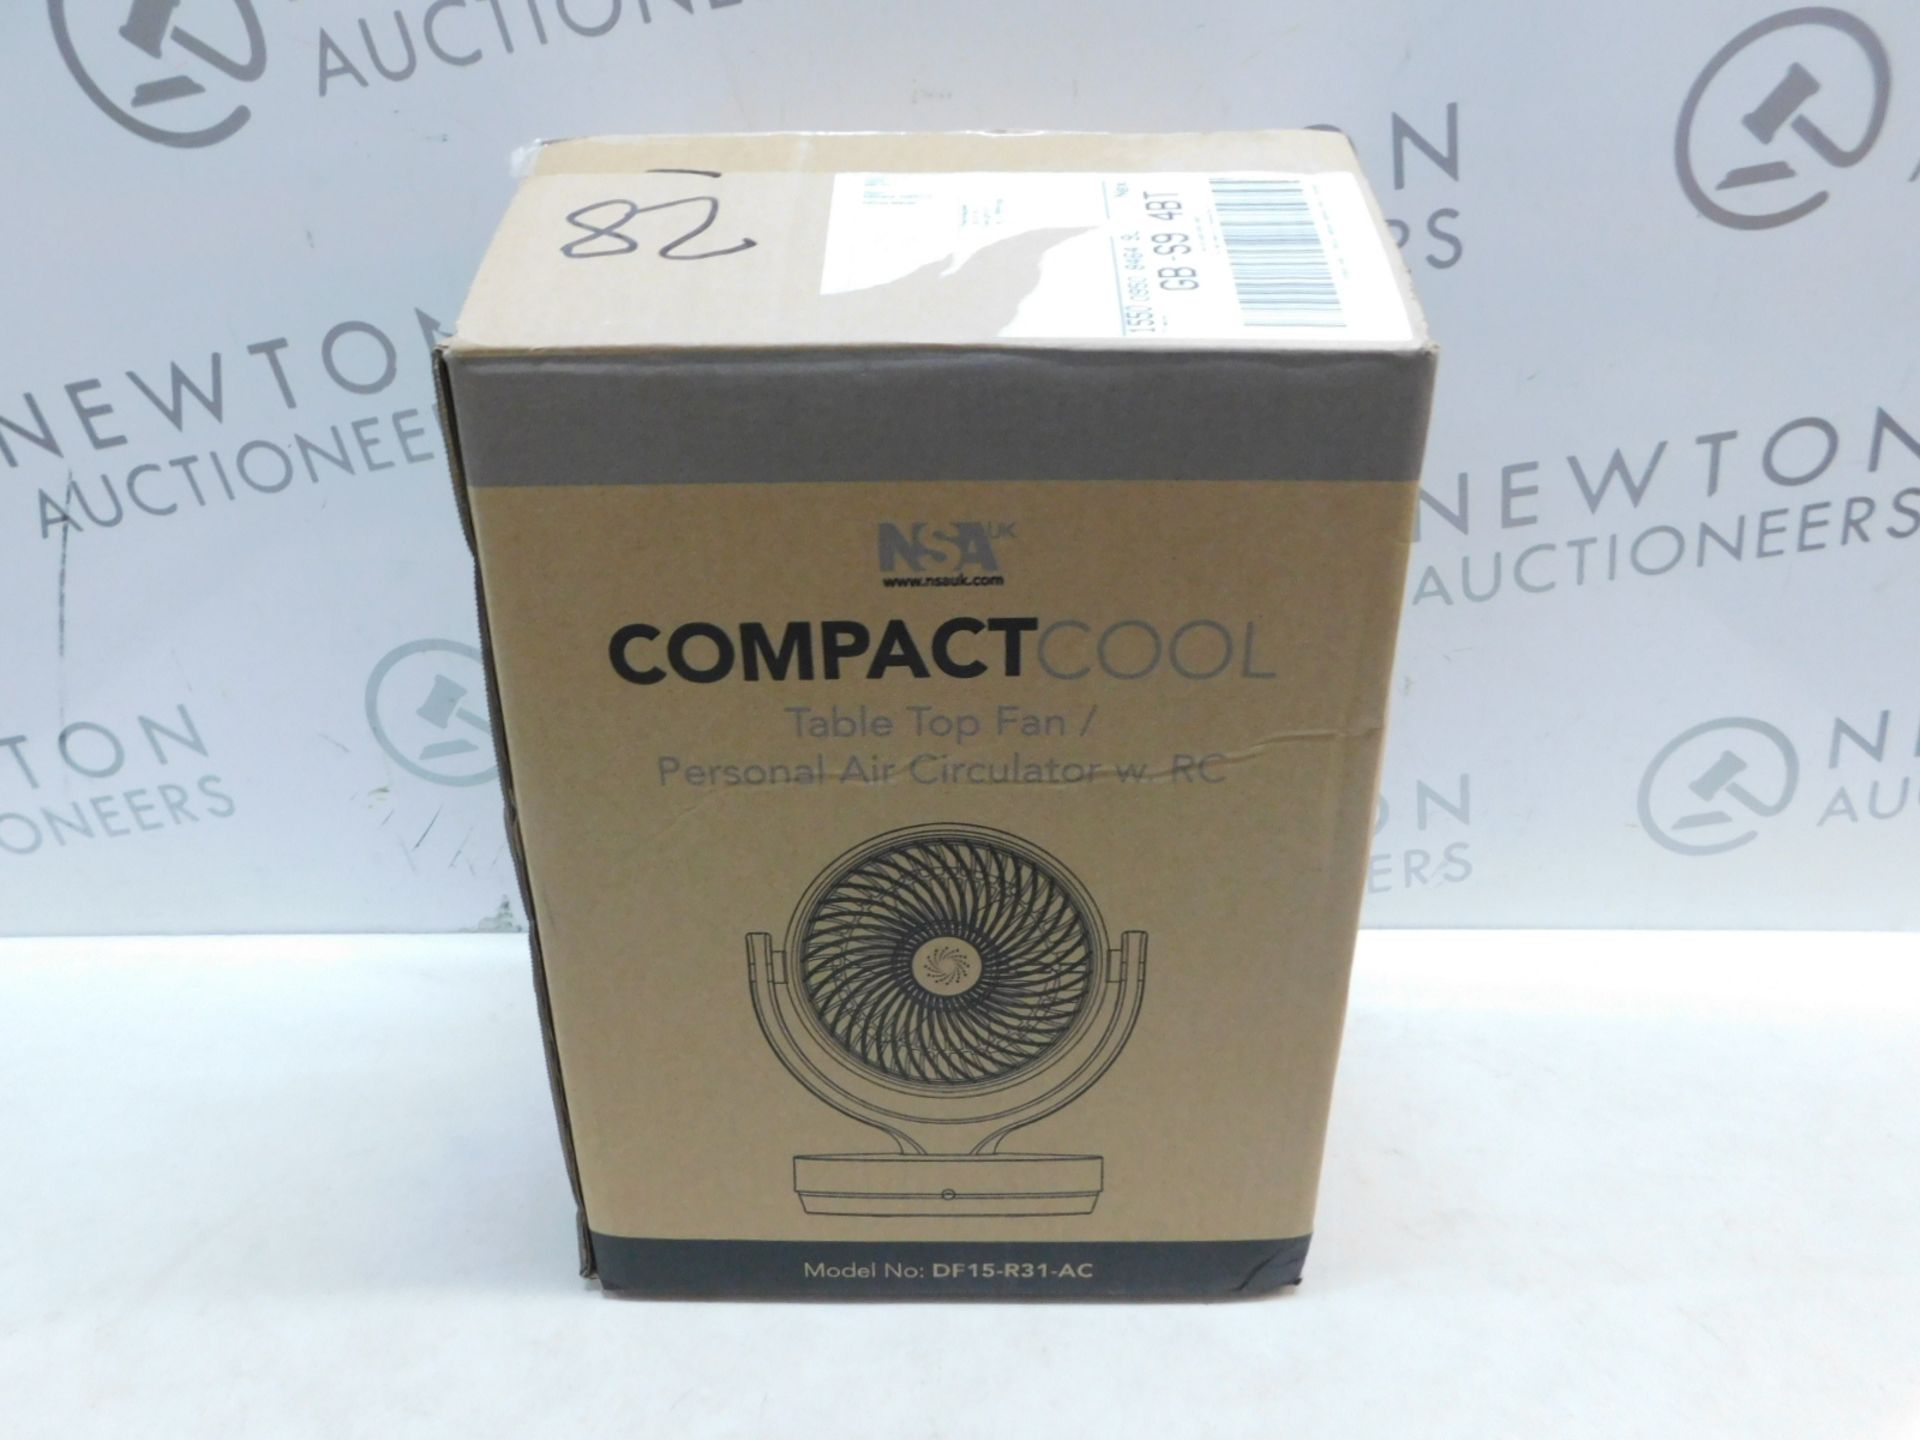 1 BOXED NSA COMPACT COOL TABLE TOP FAN RRP Â£39.99